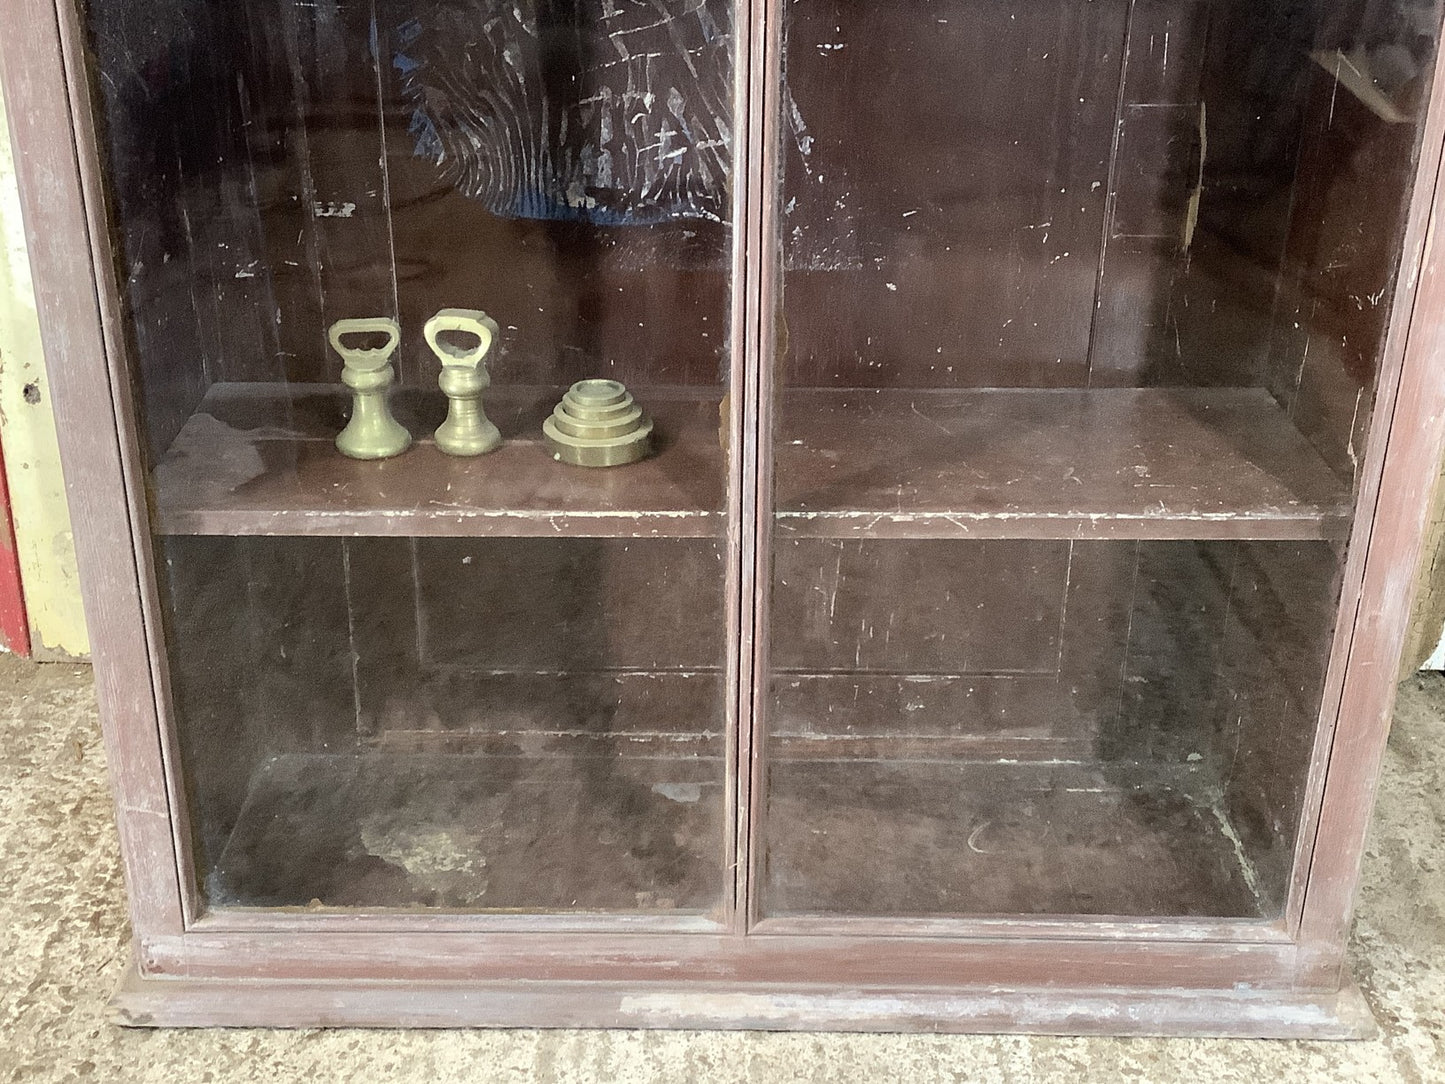 Old Victorian Pine Glazed Front Shop Display Cabinet With Key 3'2"Hx2'8"W